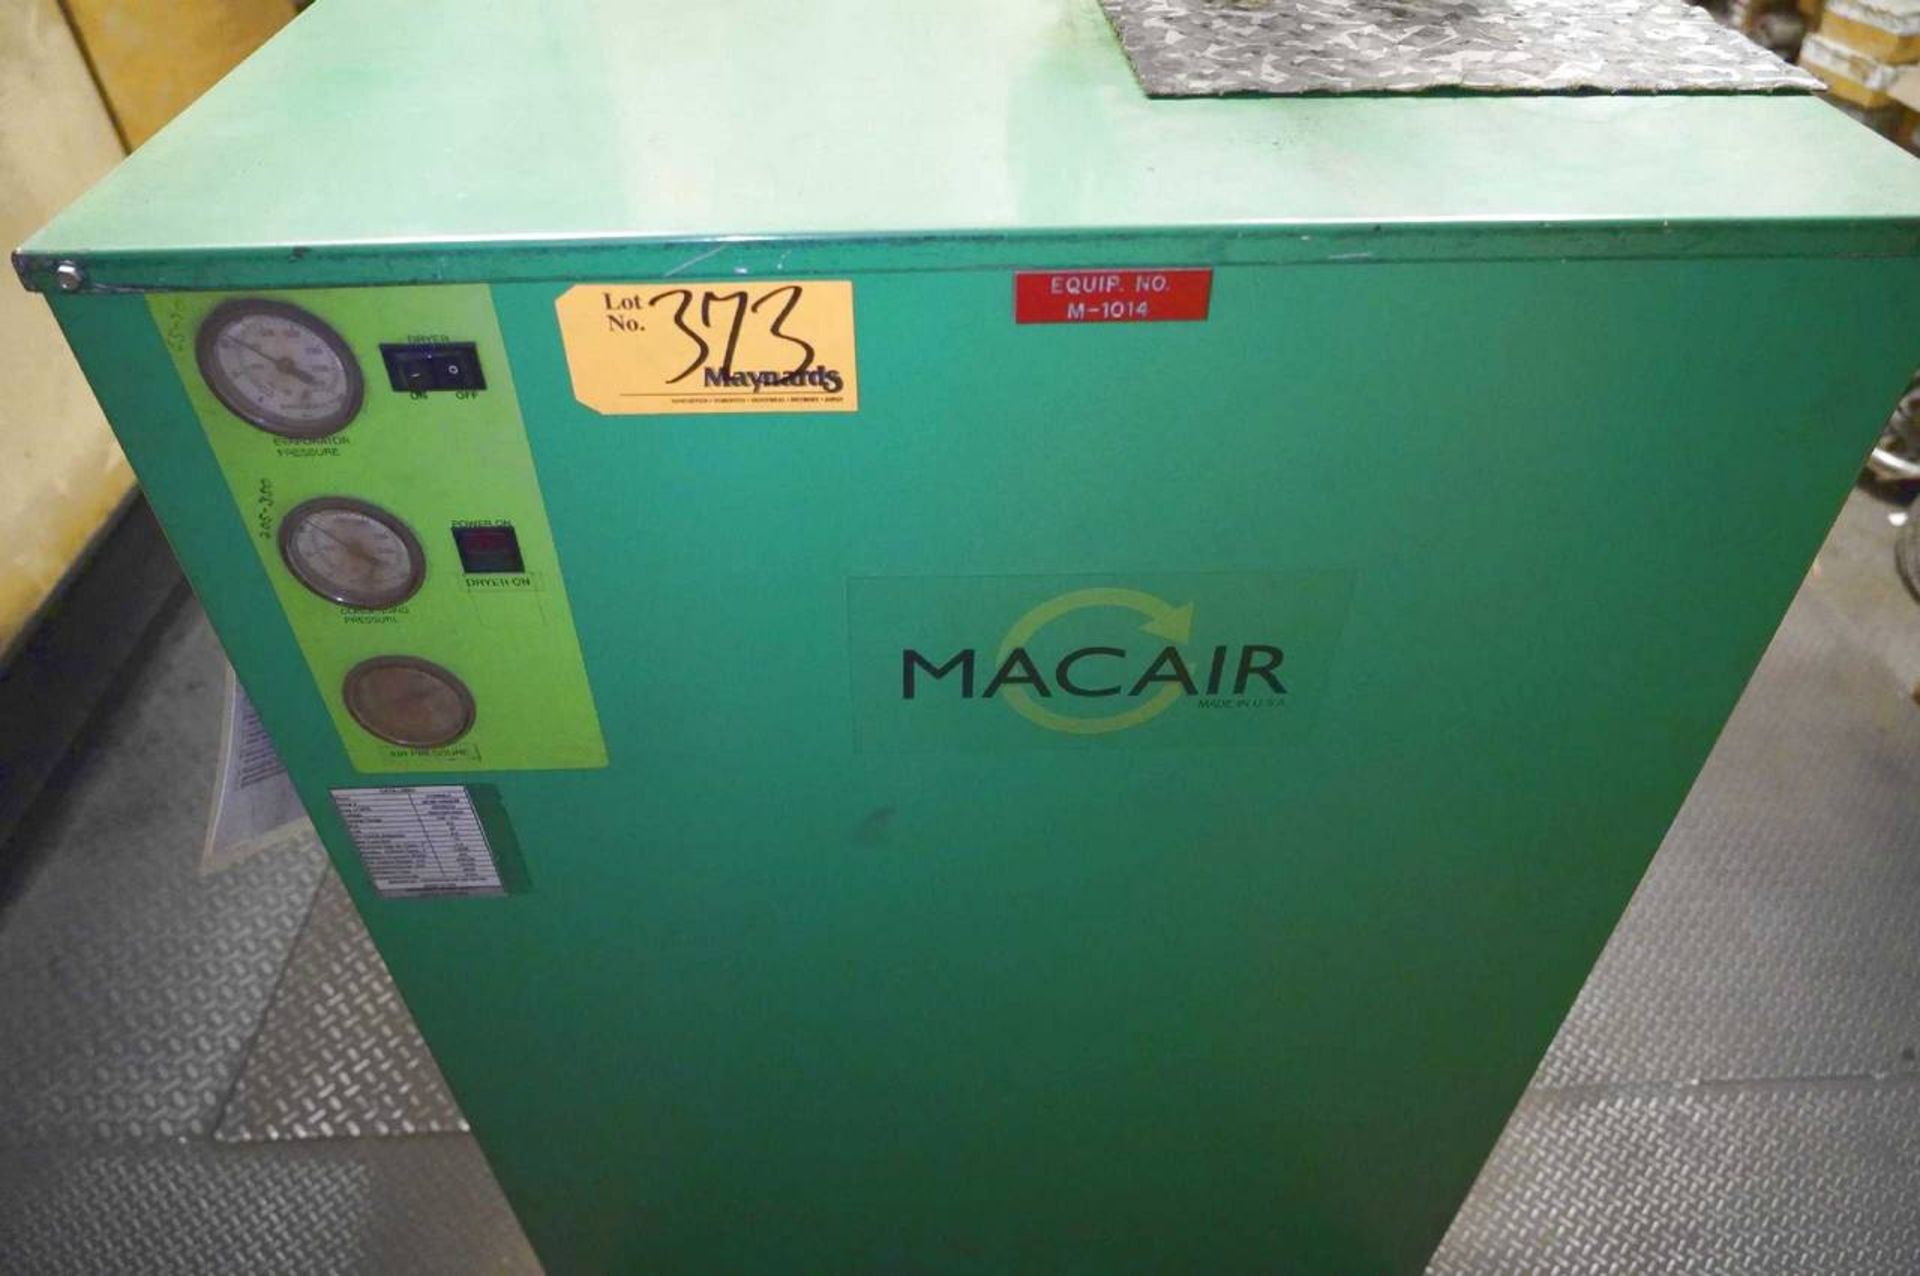 2013 Macair Refrigerated Air Dryer - Image 2 of 4